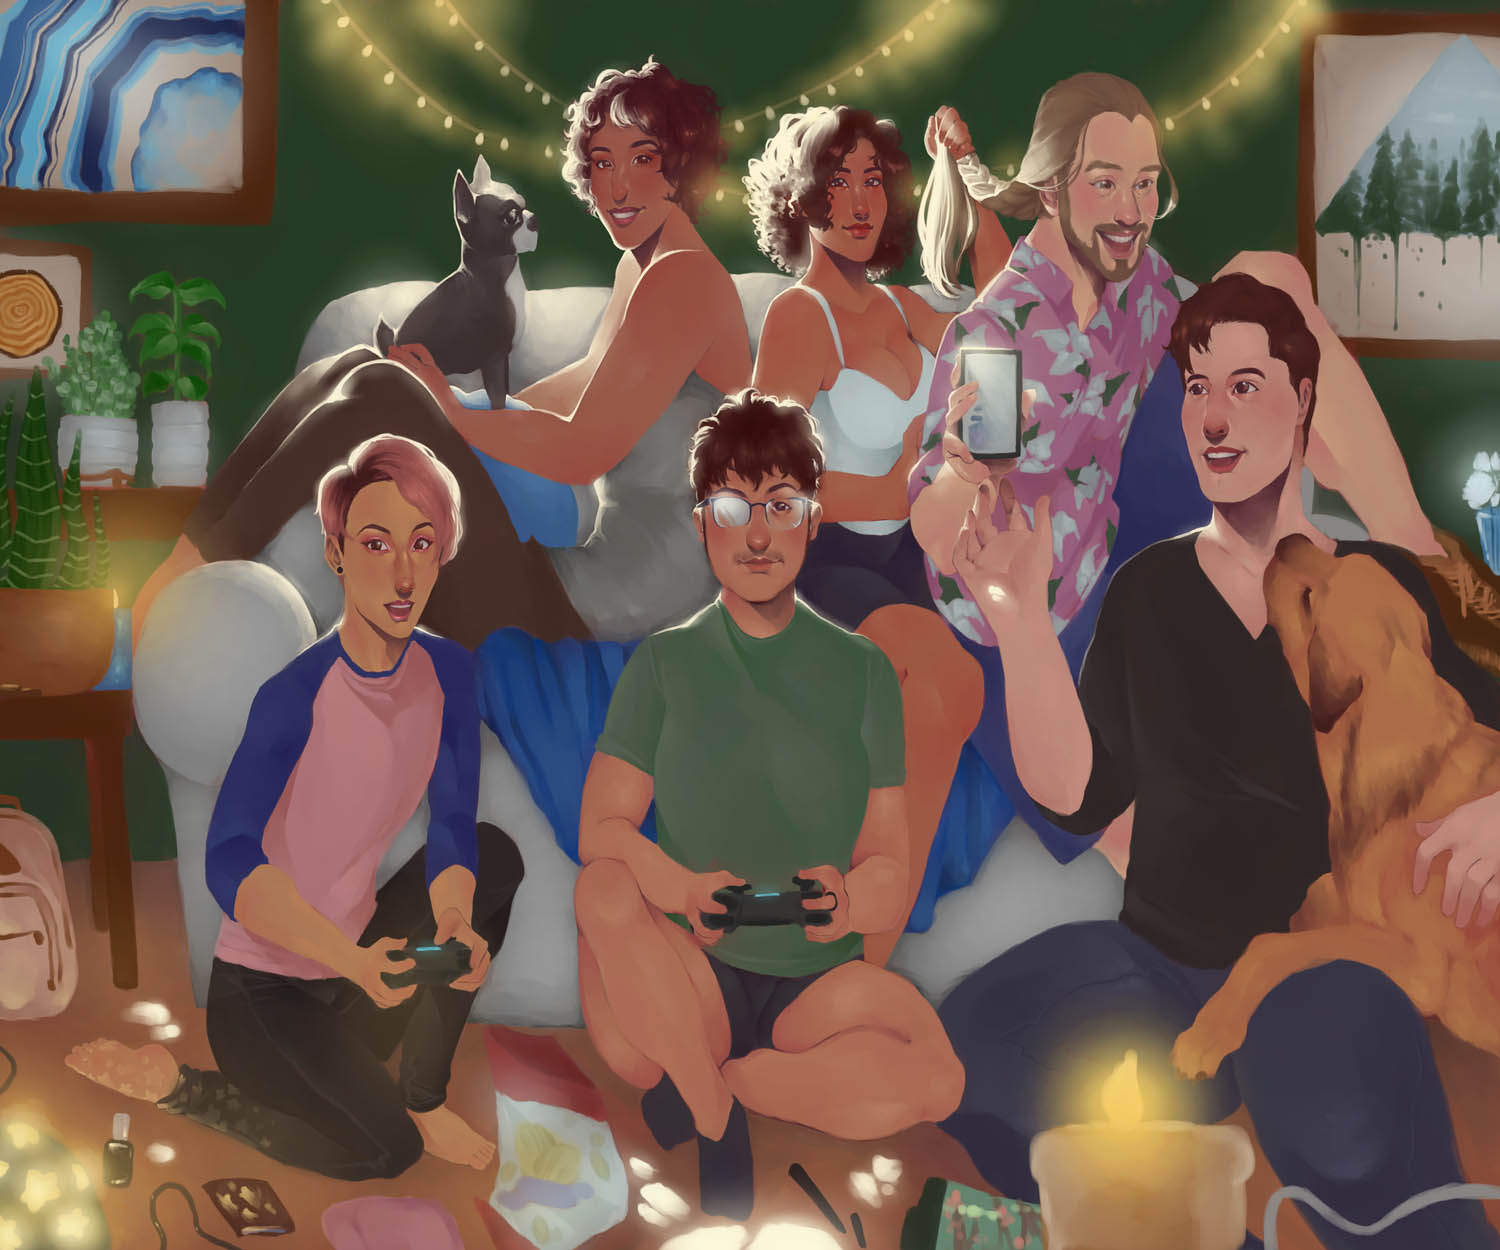 A digital illustration of a group of six people and two dogs crowded around a couch indoors and talking, playing video games, and braiding each others' hair.